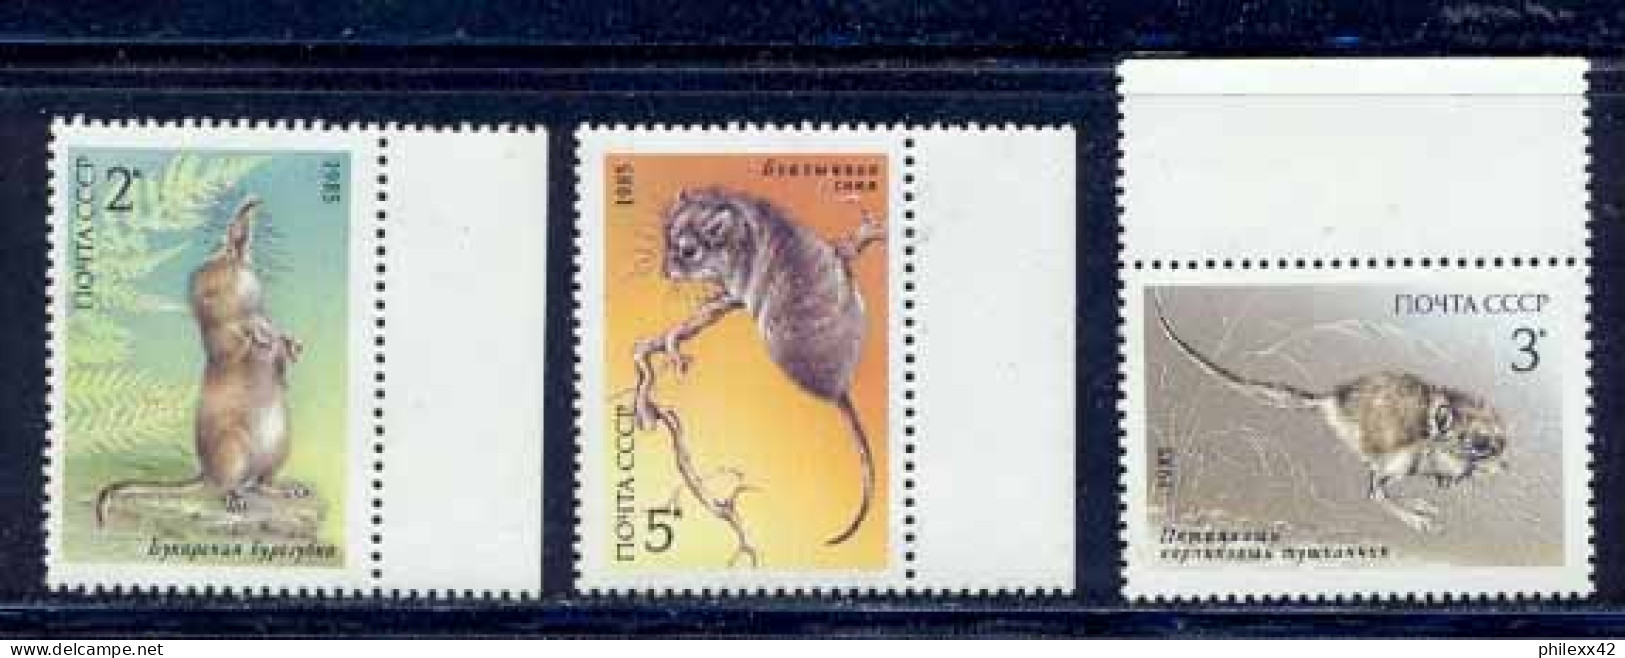 Russie (Russia Urss USSR) - 166 - N°5240 / 5242 Faune (Animals & Fauna) RONGEURS - Roedores